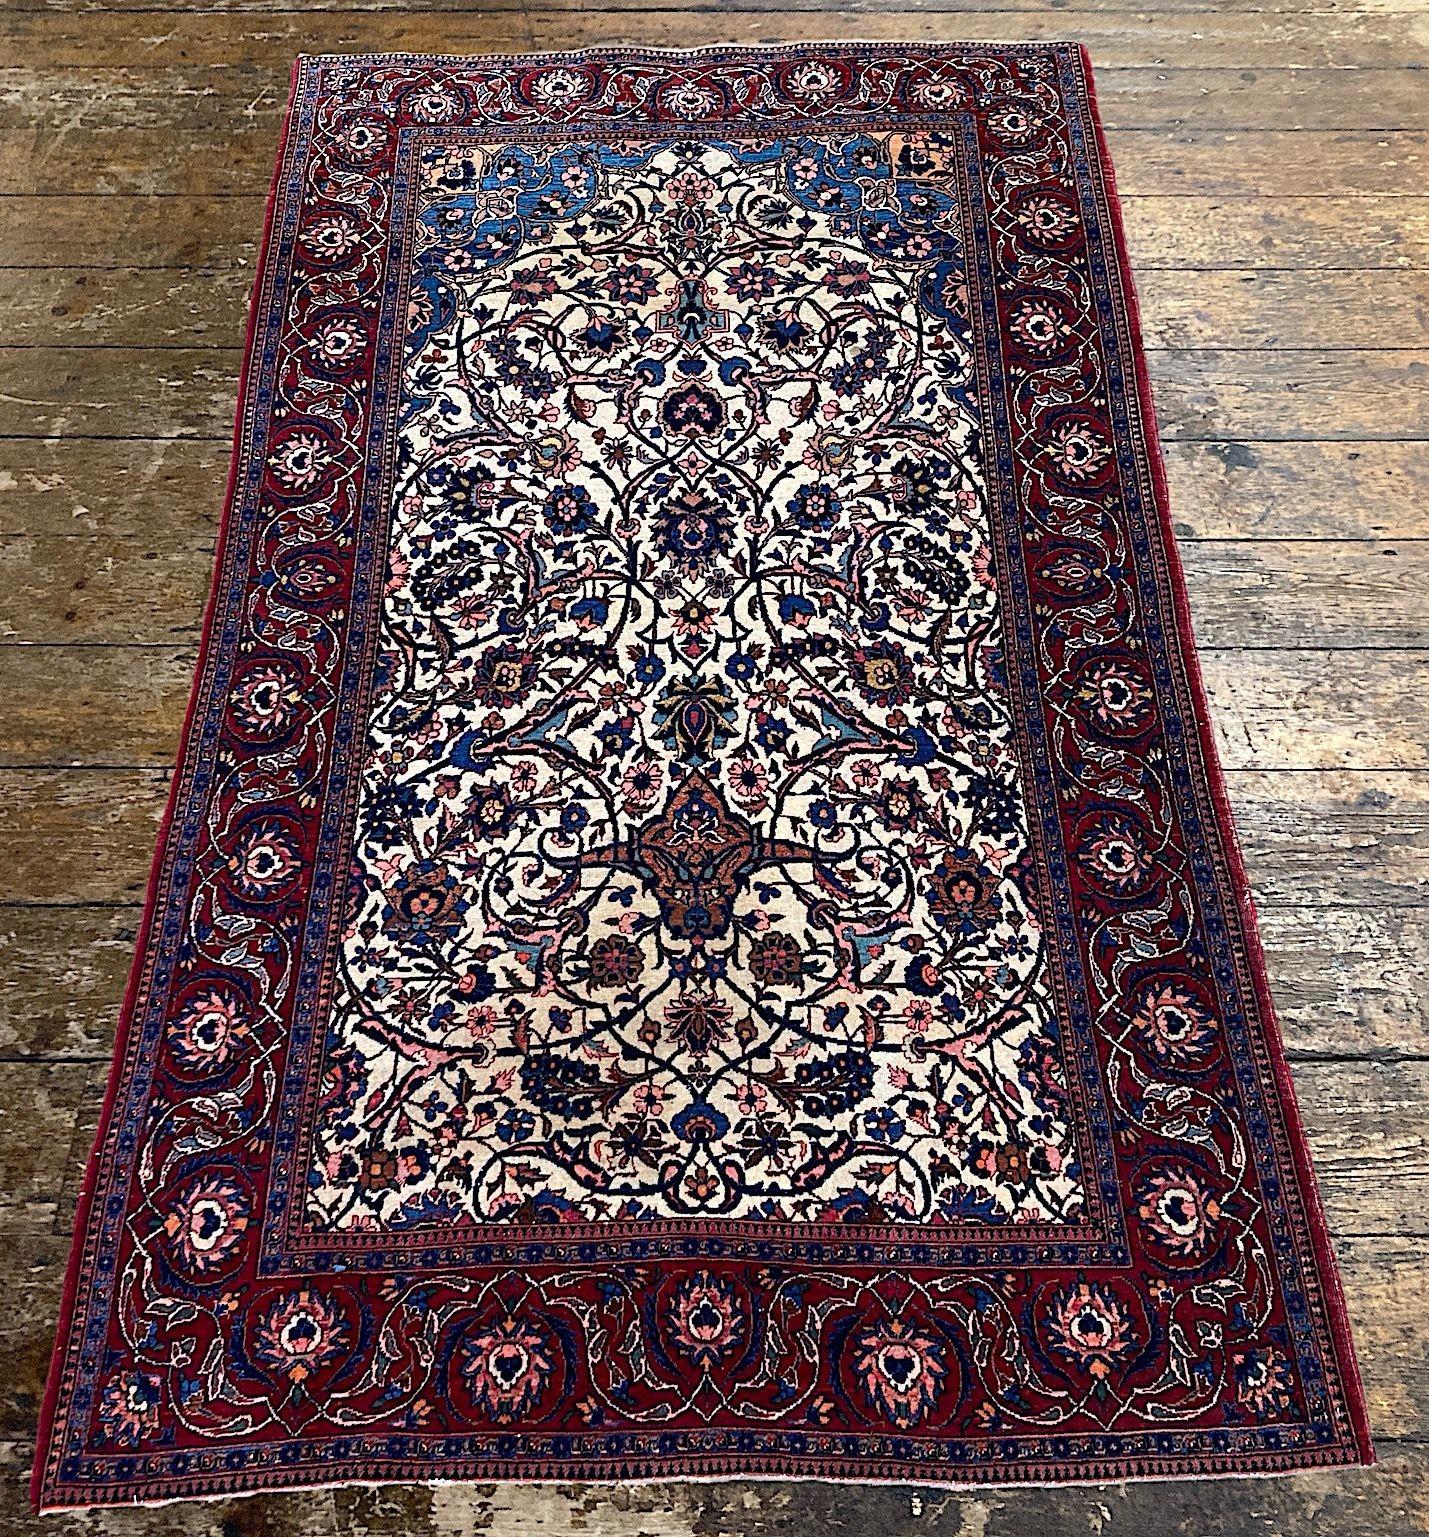 Early 20th Century Antique Kashan Rug 2.12m x 1.31m For Sale